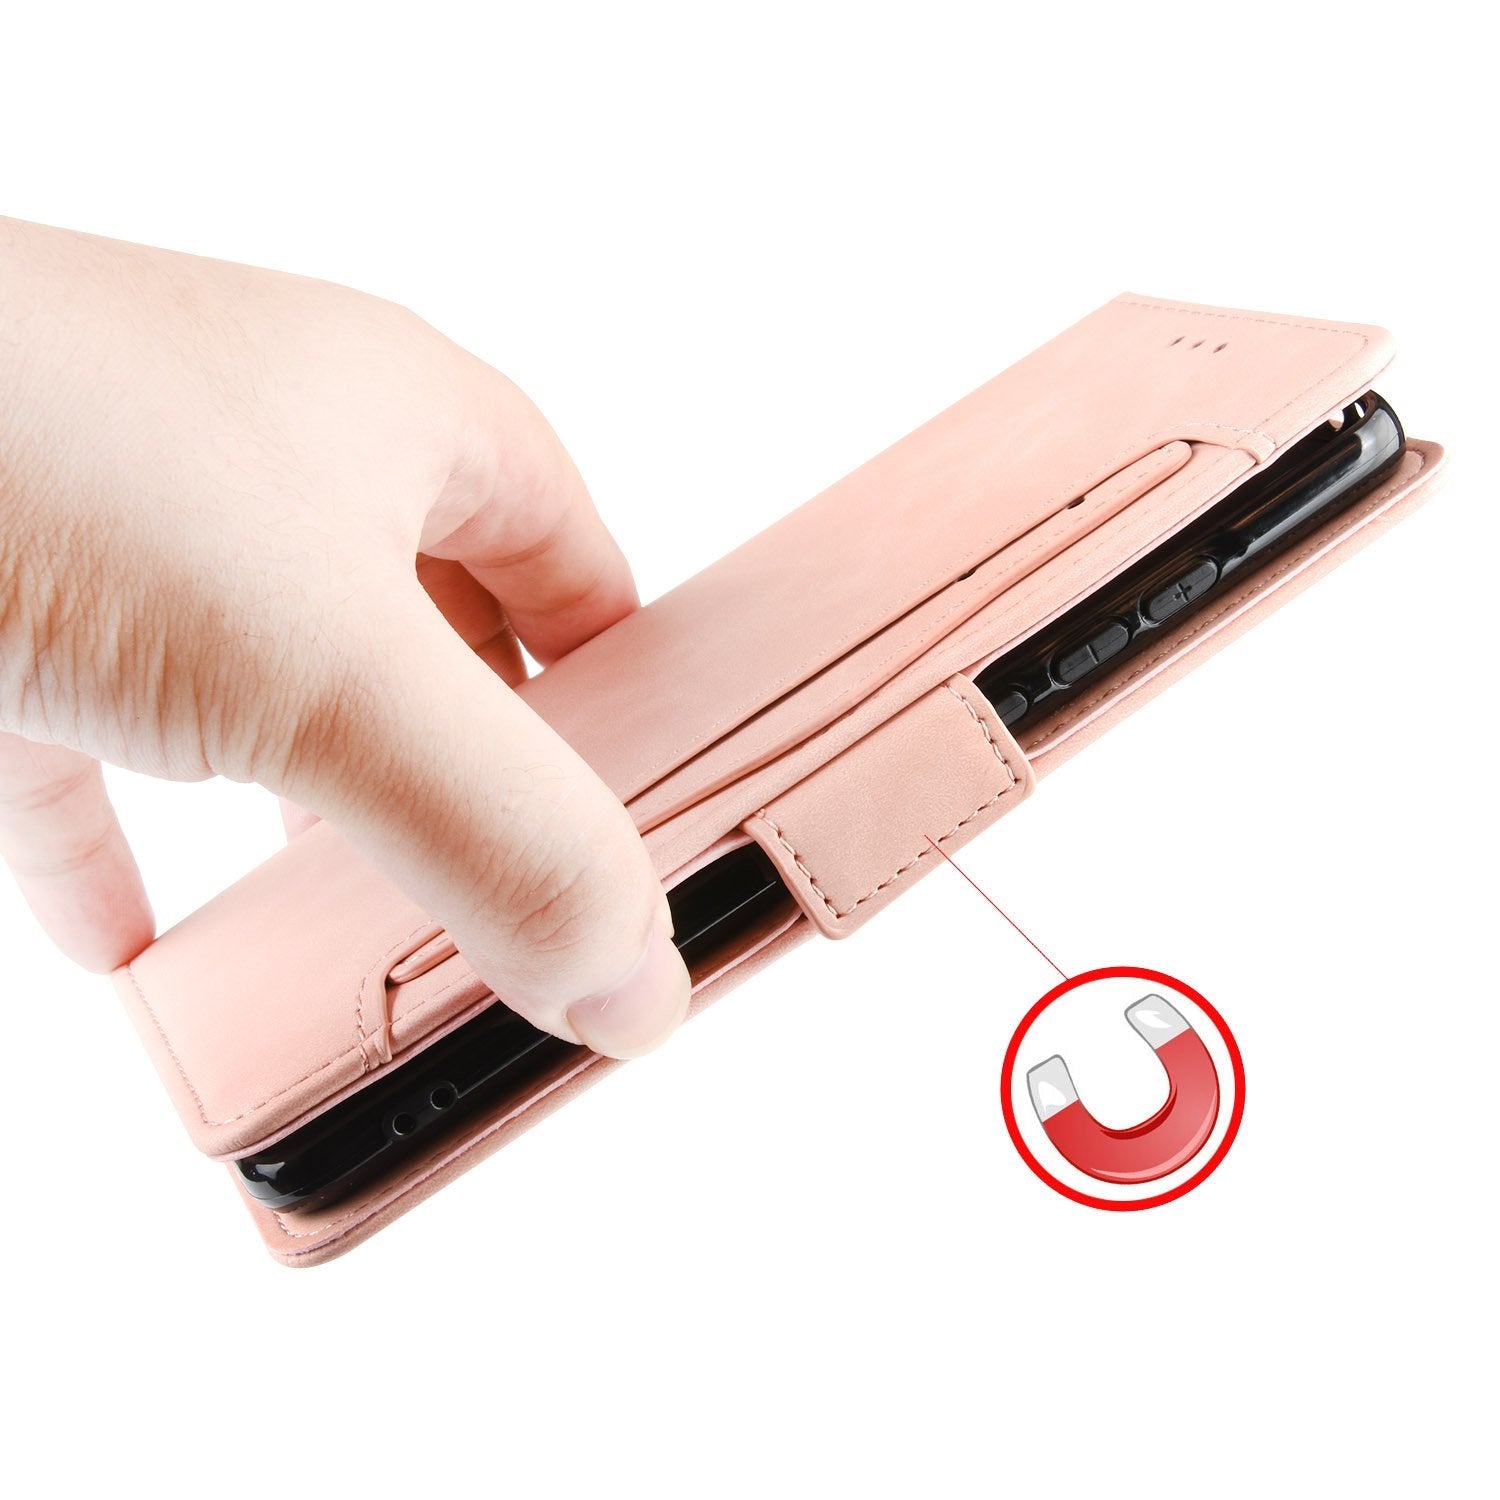 Luxury Multi-Card Slot Wallet Flip Cover for Galaxy S/Note Series